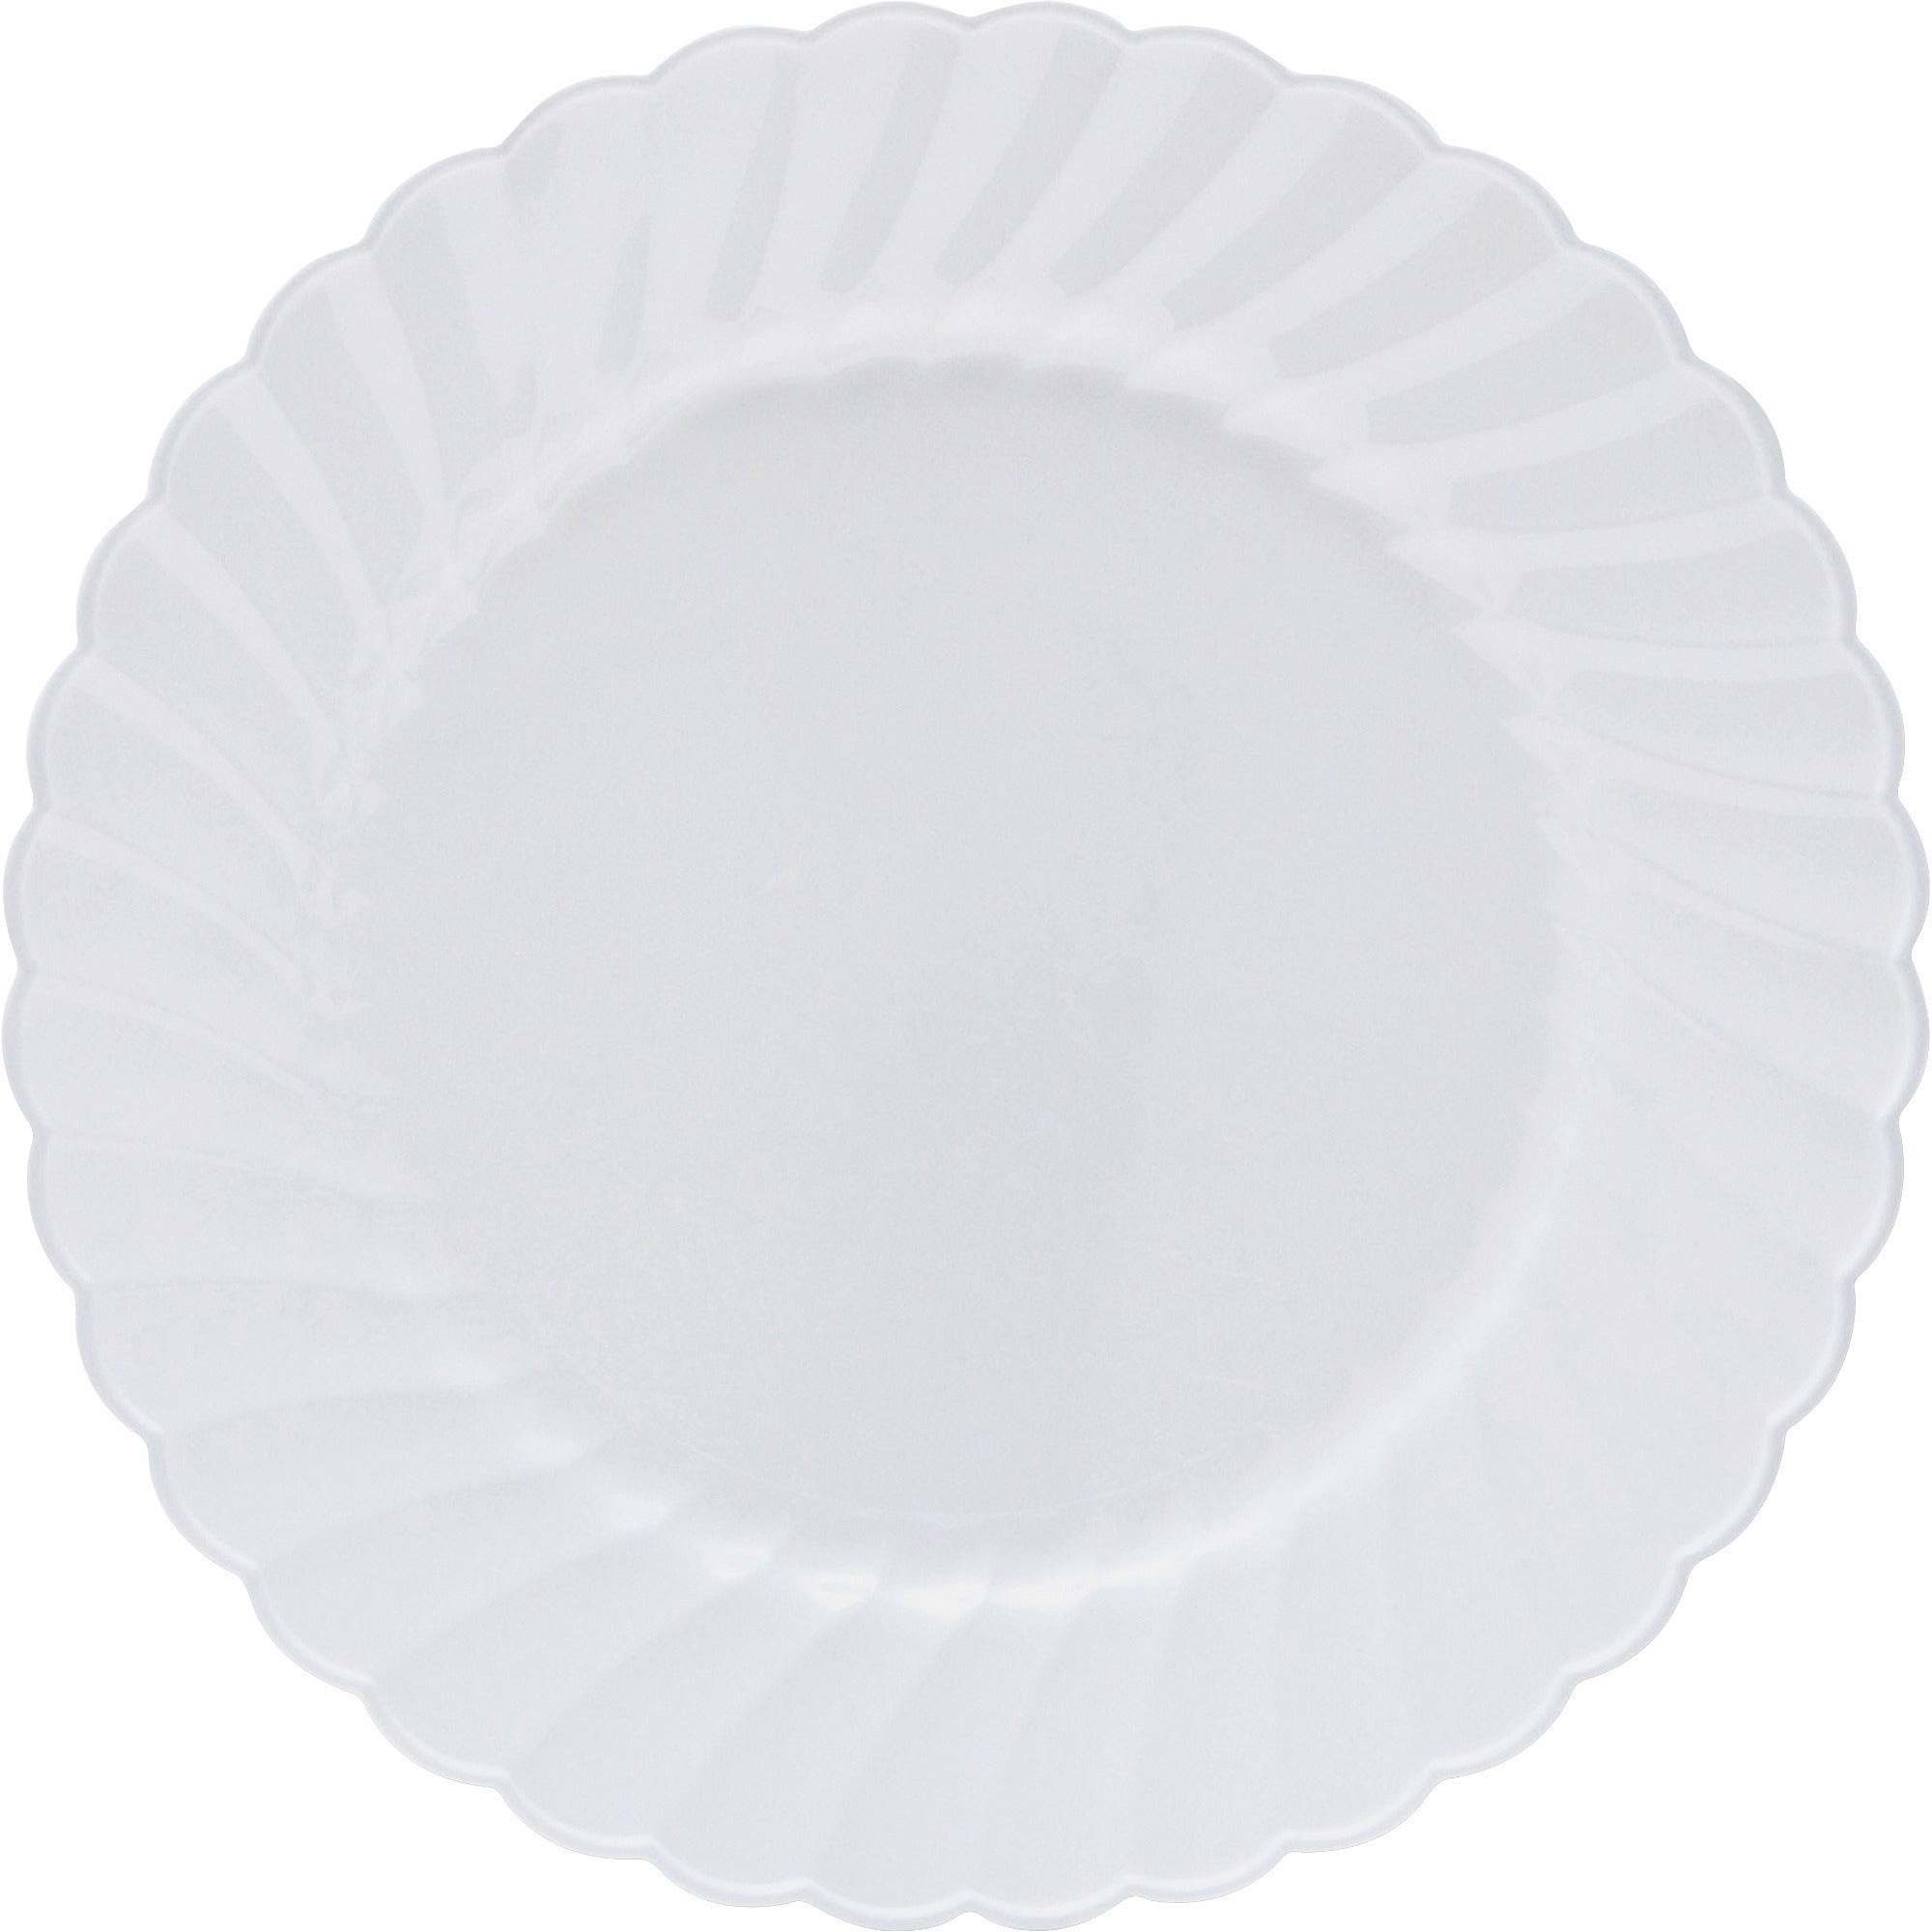 classicware-6-heavyweight-plates-picnic-party-disposable-white-plastic-body-12-pack_wnarscw61512w - 1